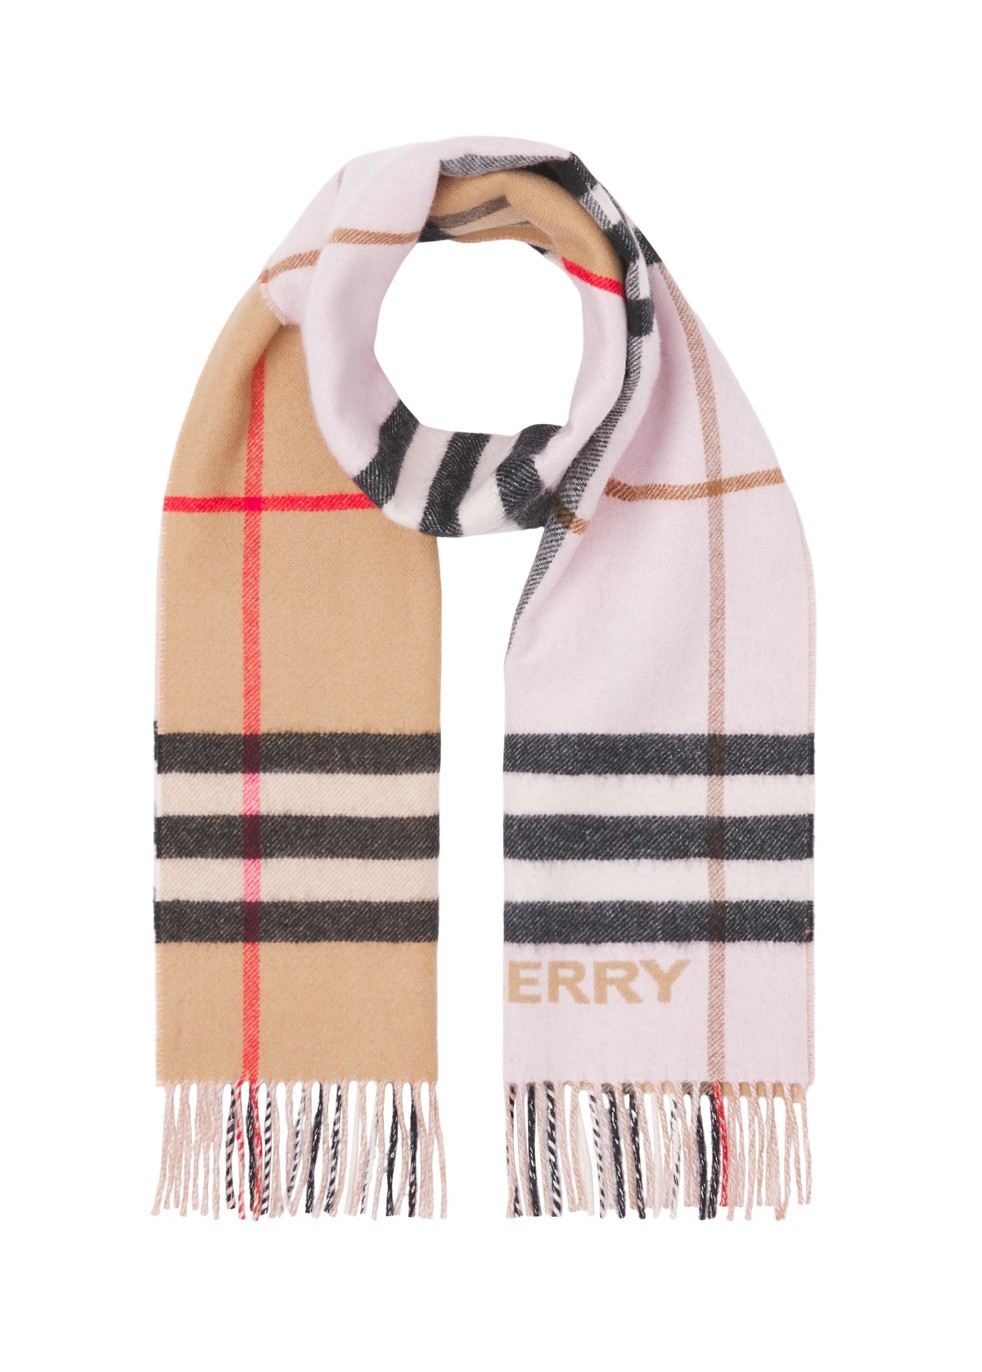 Burberry Contrast Check Cashmere Scarf Hats & Scarves | Heathrow ...